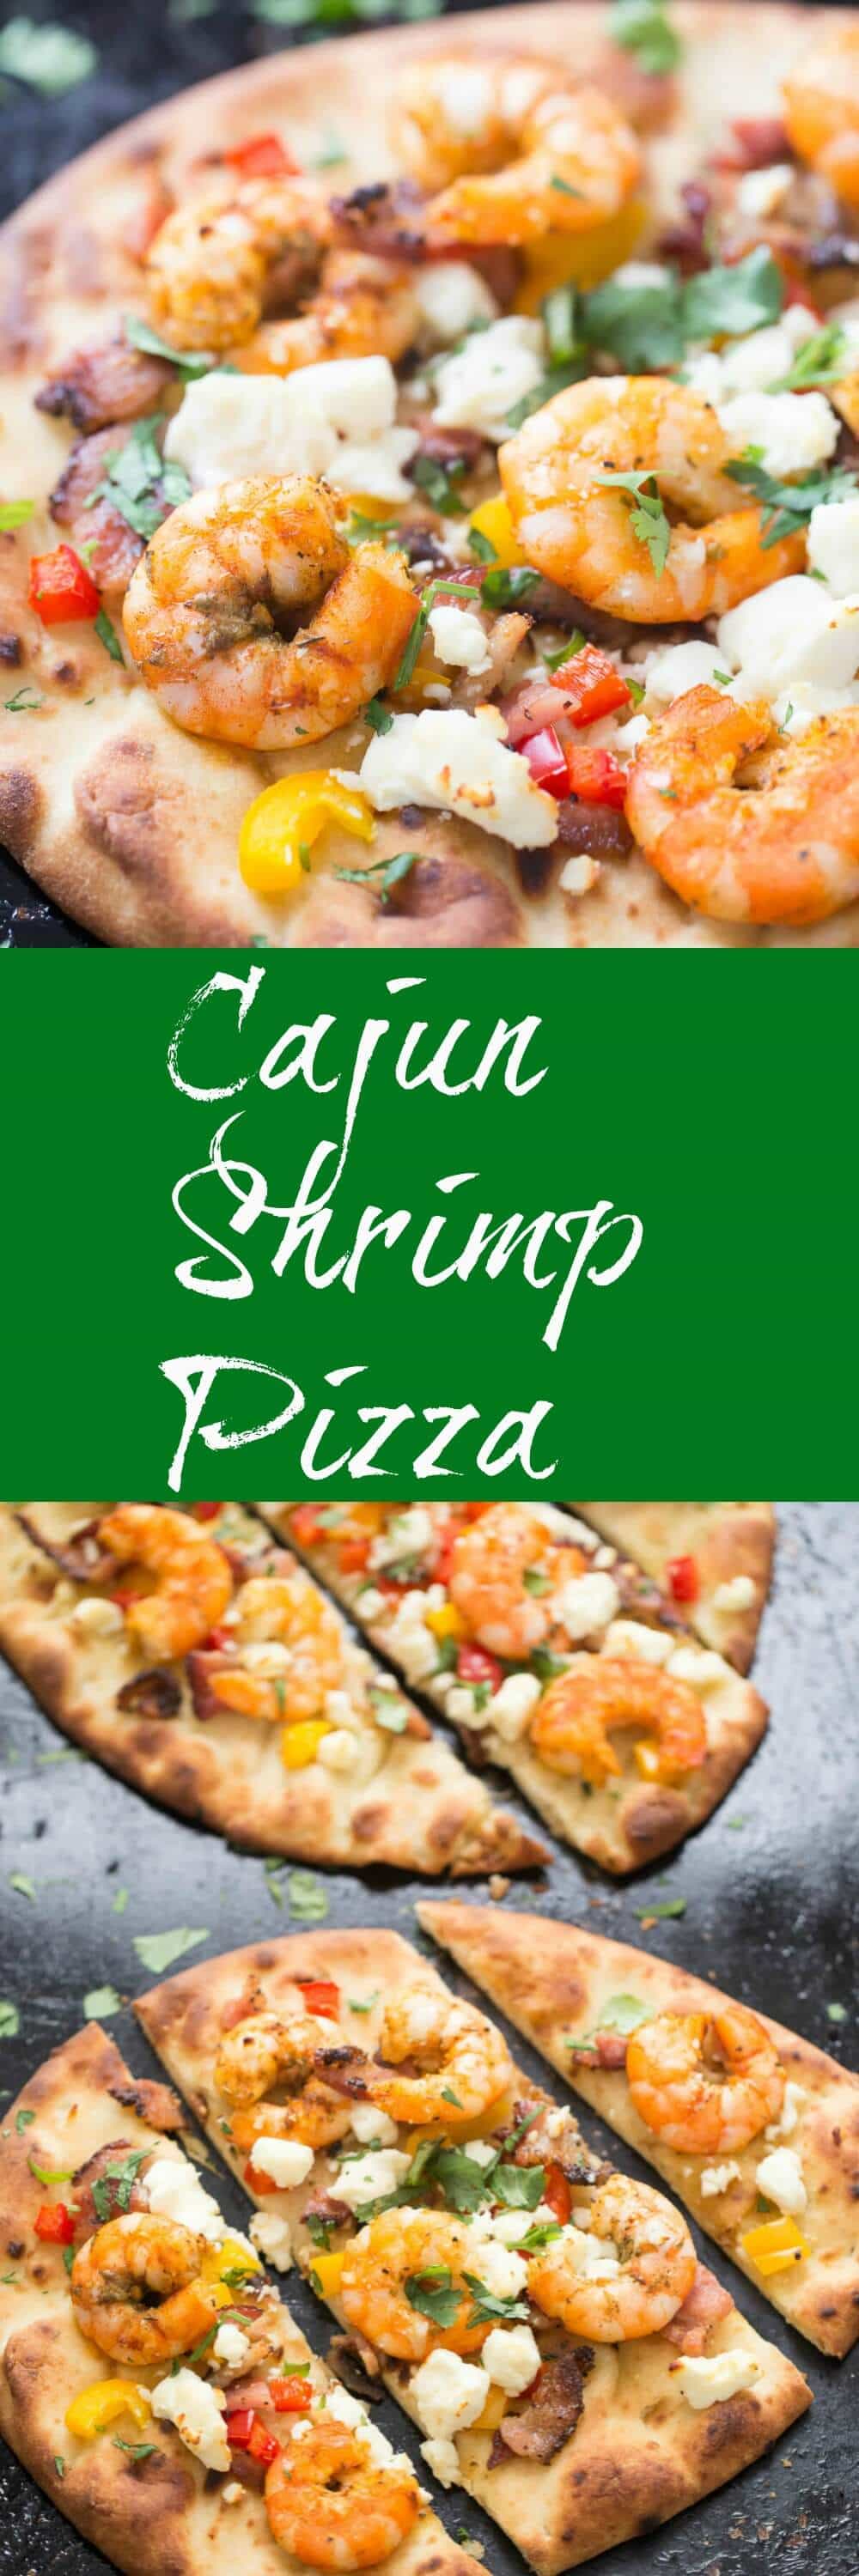 This naan bread Cajun shrimp pizza is so easy to prepare! It can be served as an appetizer or a meal; your friends and family are going to love it!